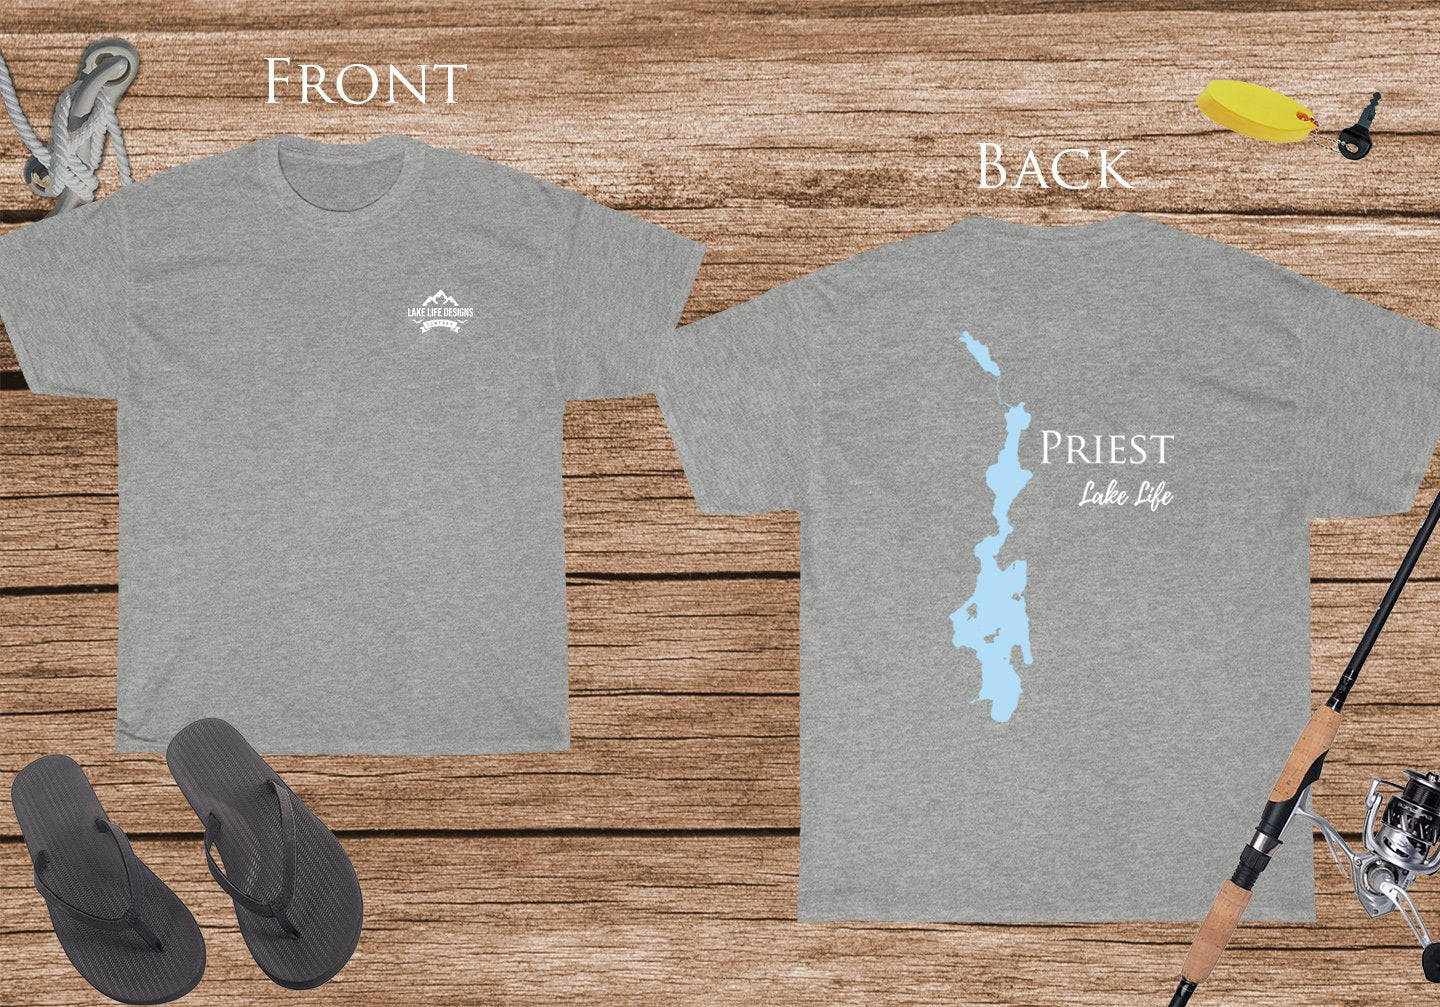 Priest Lake Life - Cotton Short Sleeved - FRONT & BACK PRINTED - Short Sleeved Cotton Tee - Idaho Lake